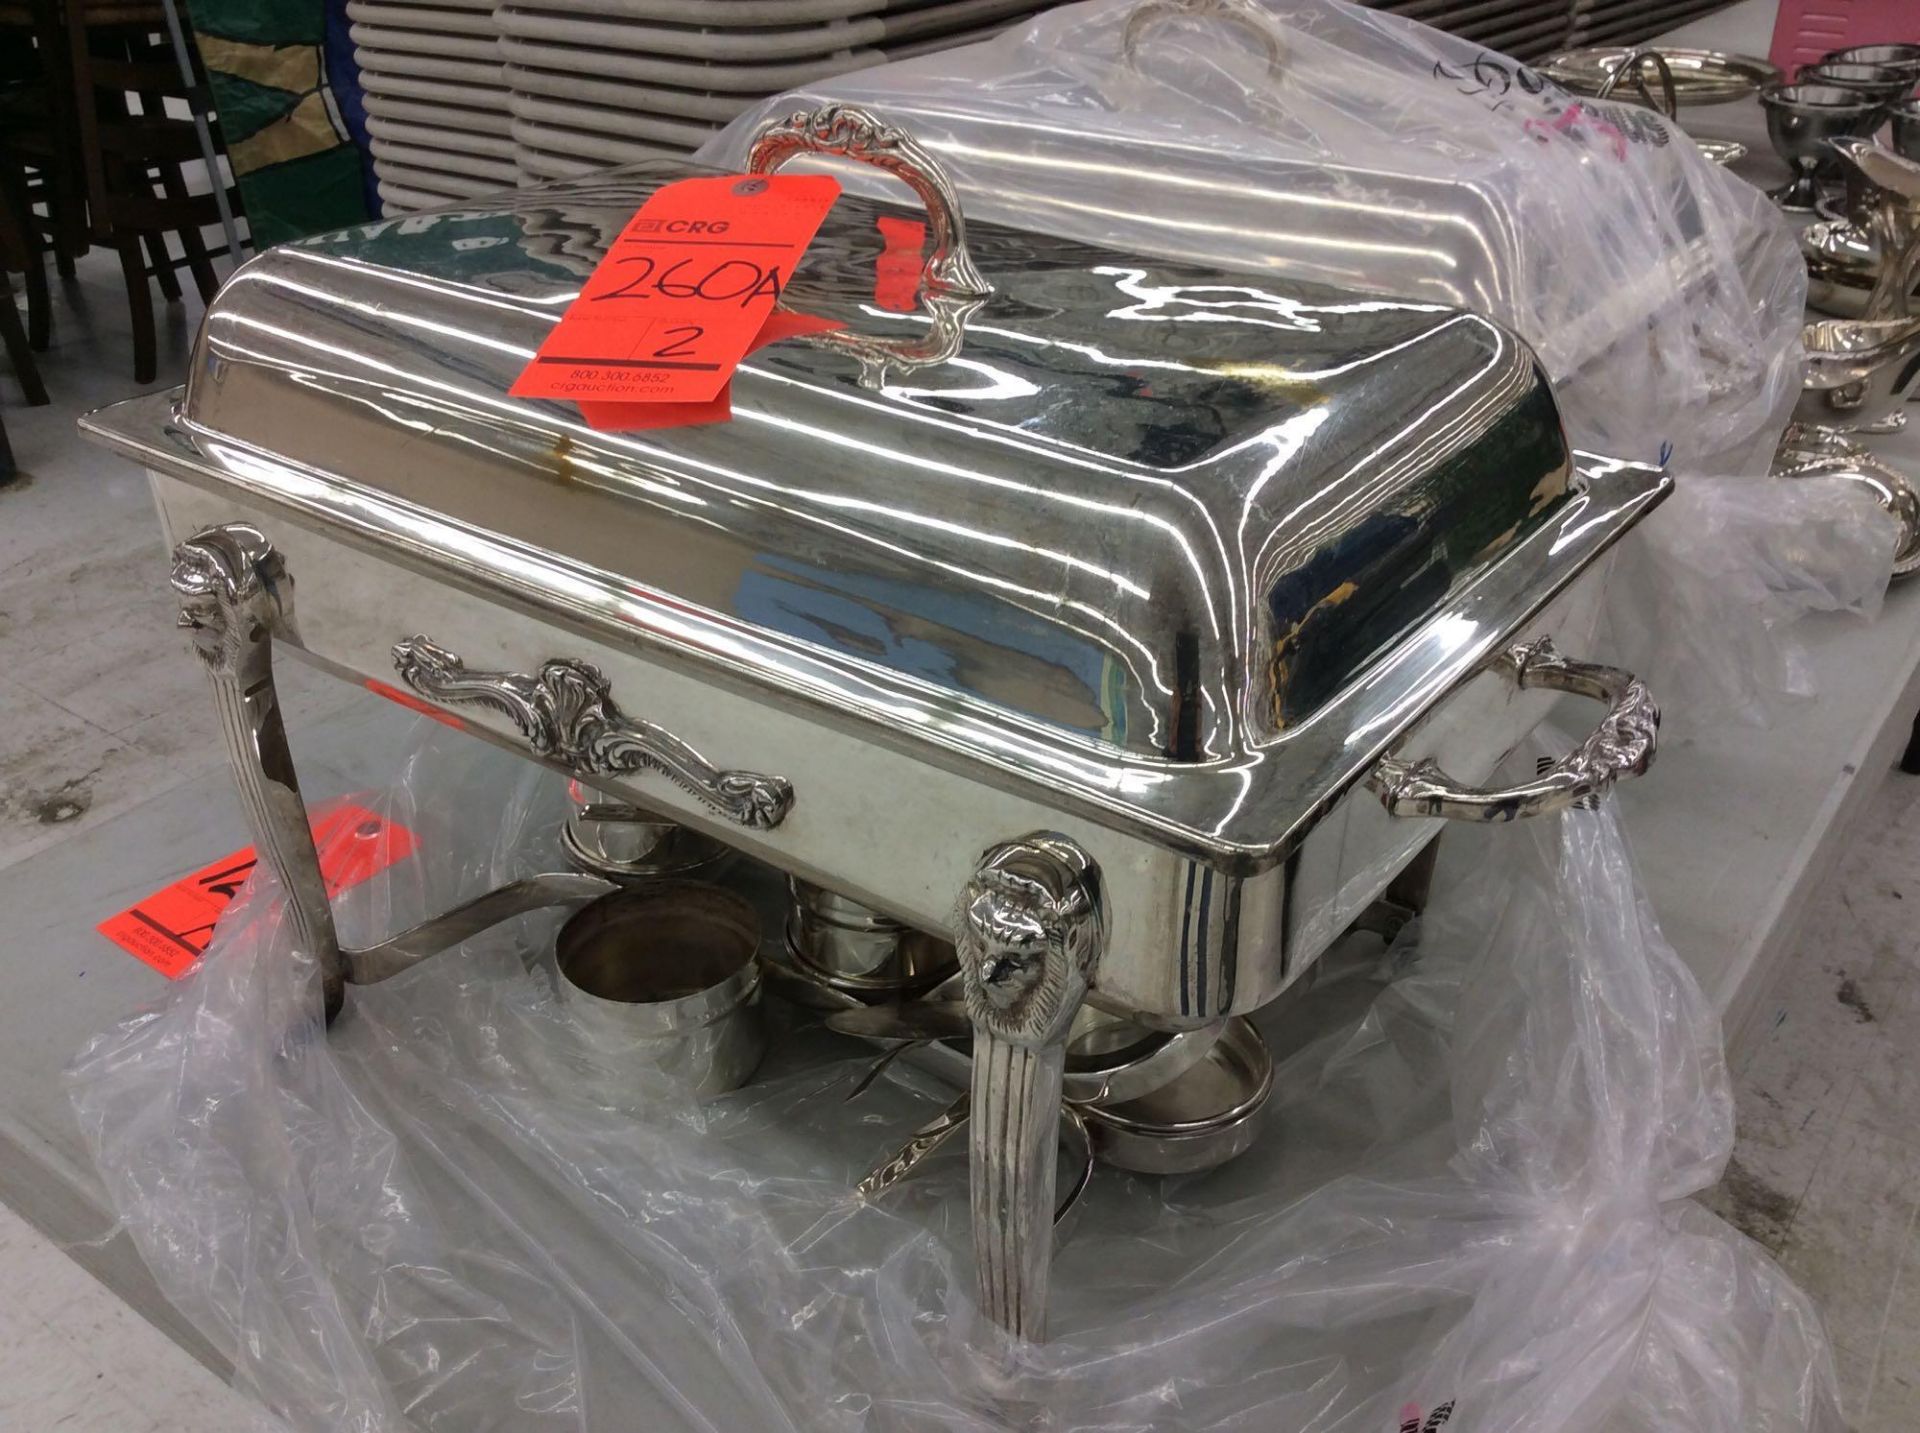 Lot of (2) silver-plated chafers, approx. 13.5 " x 21.5", with insert - Image 2 of 2